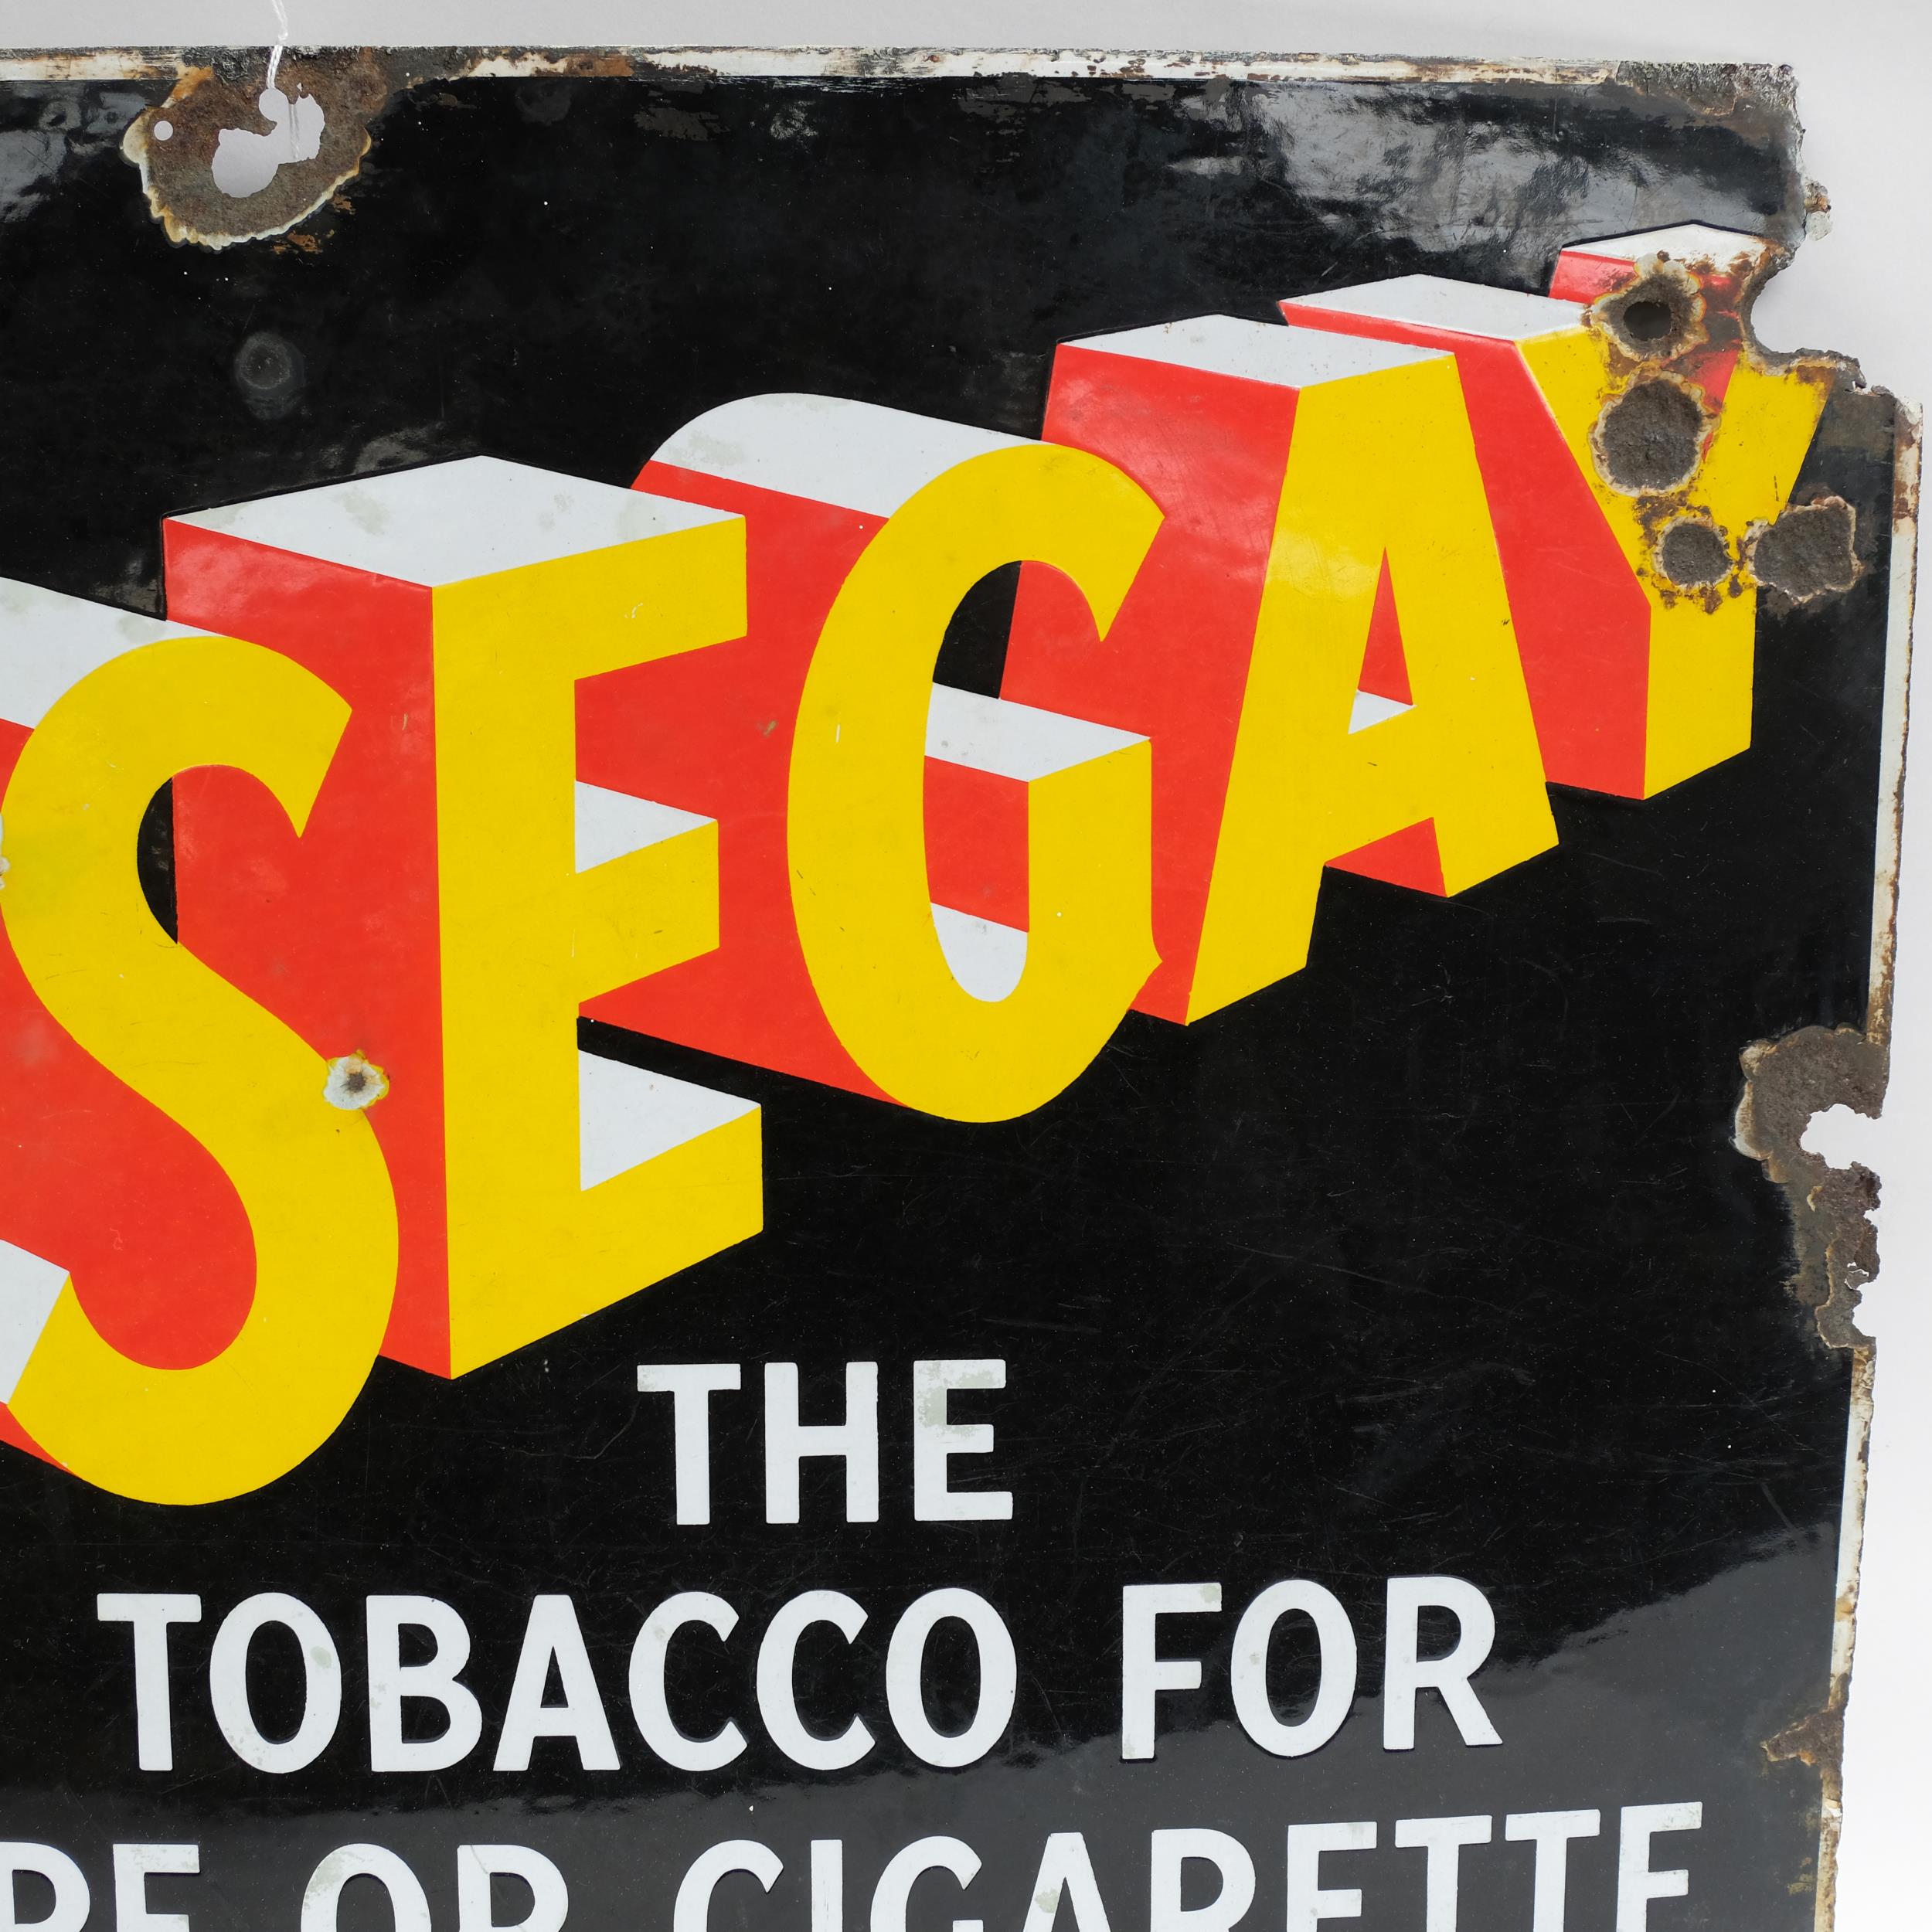 A Vintage enamel sign "Nosegay" The Tobacco for Pipe or Cigarette, 76cm x 51cm - Image 2 of 2